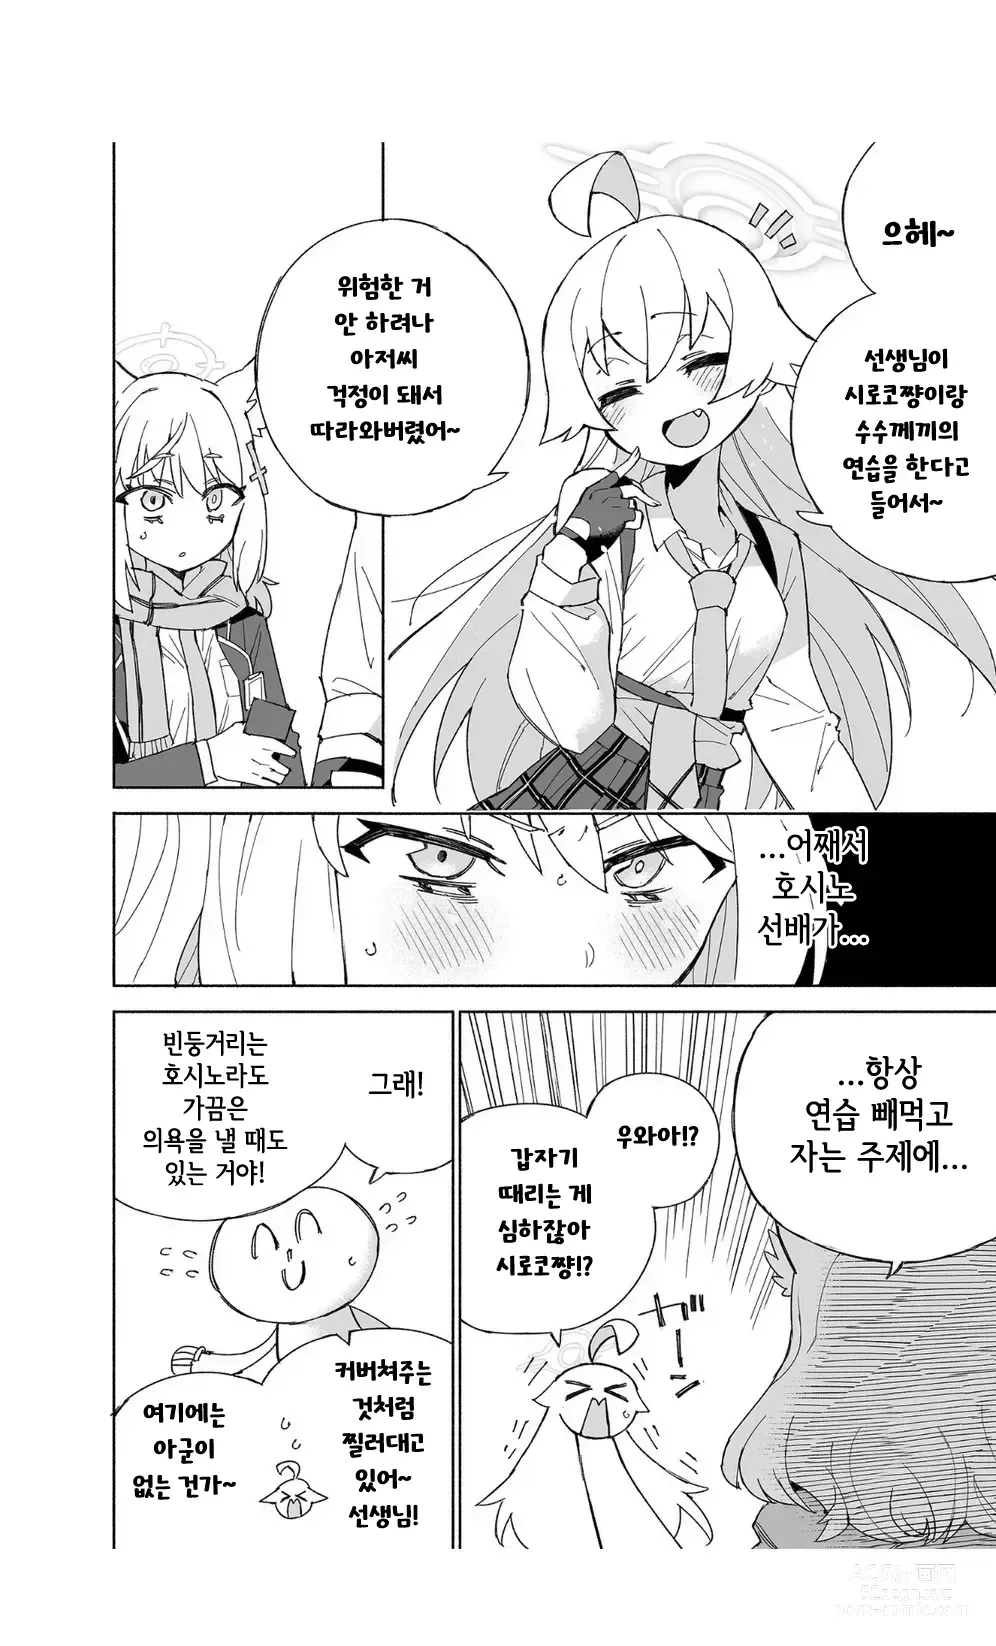 Page 7 of doujinshi 늑대의 물